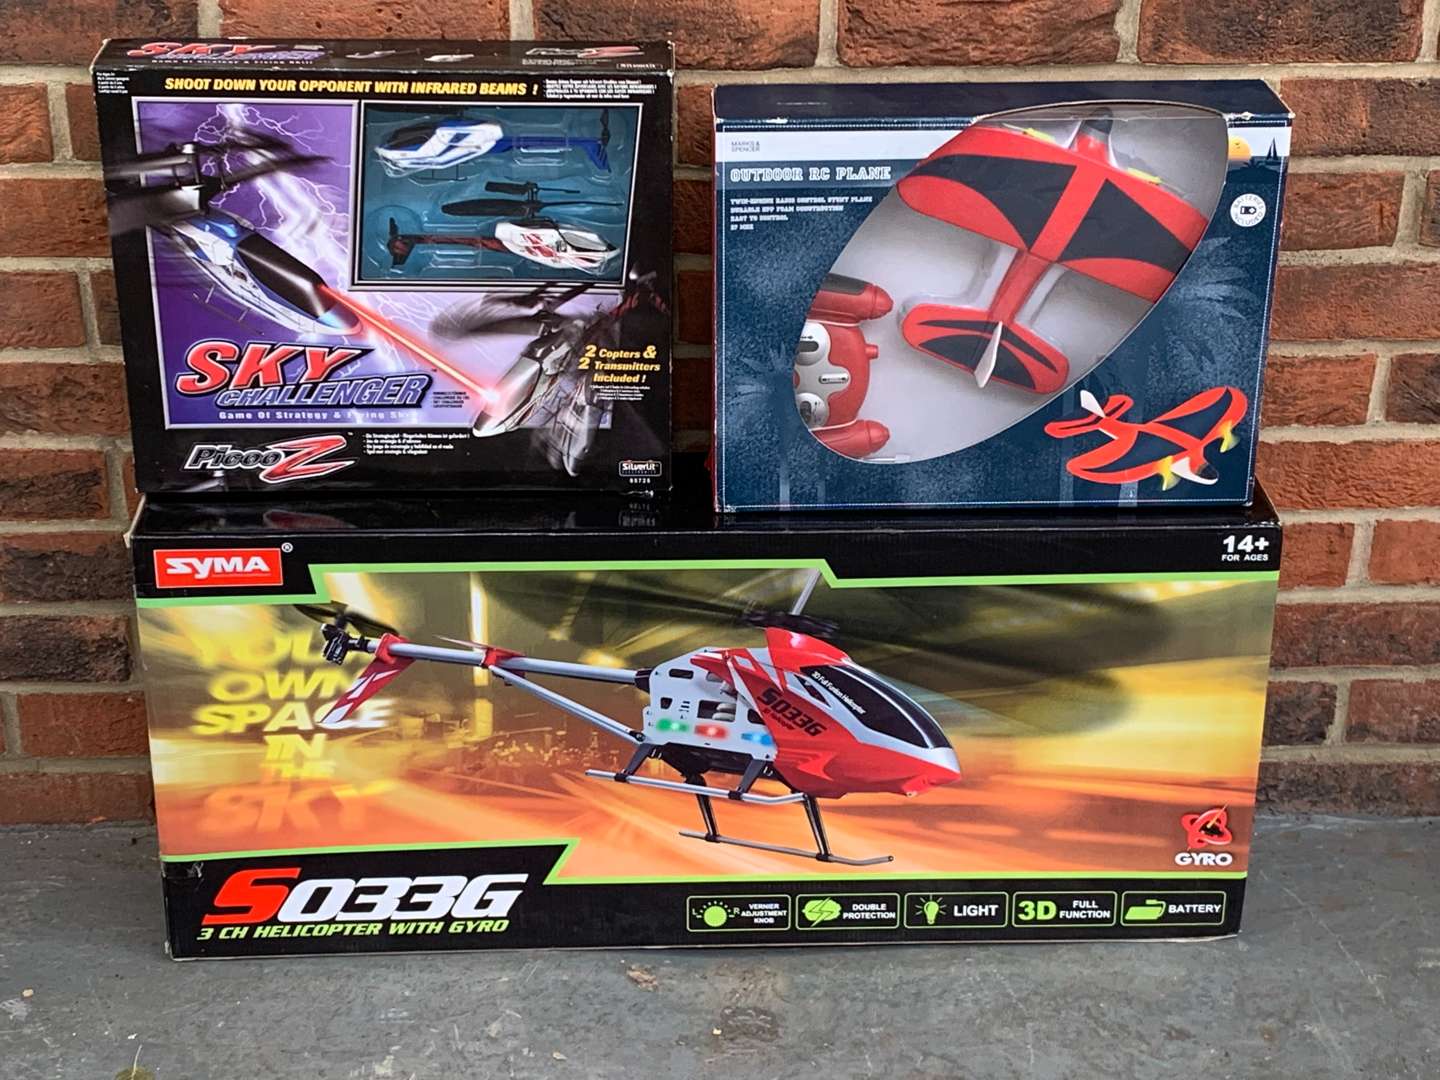 <p>Two Remote Controlled Helicopters & Plane</p>